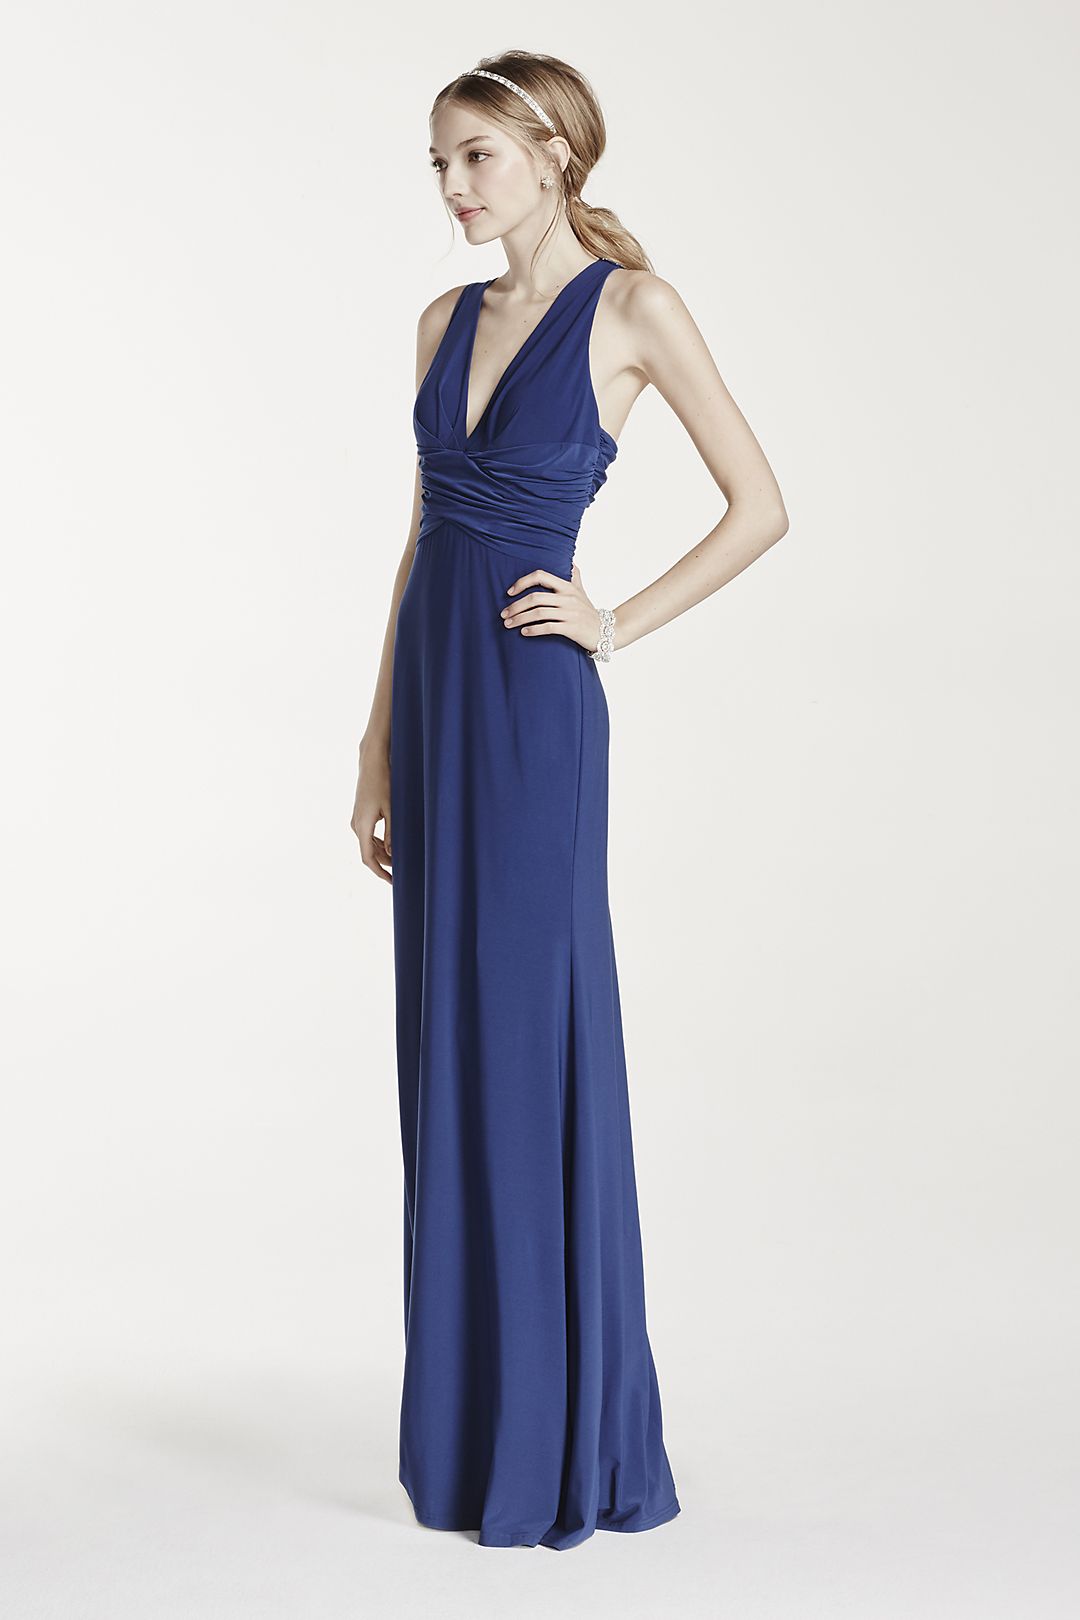 Embellished Strappy Back Dress with Ruched Waist Image 3